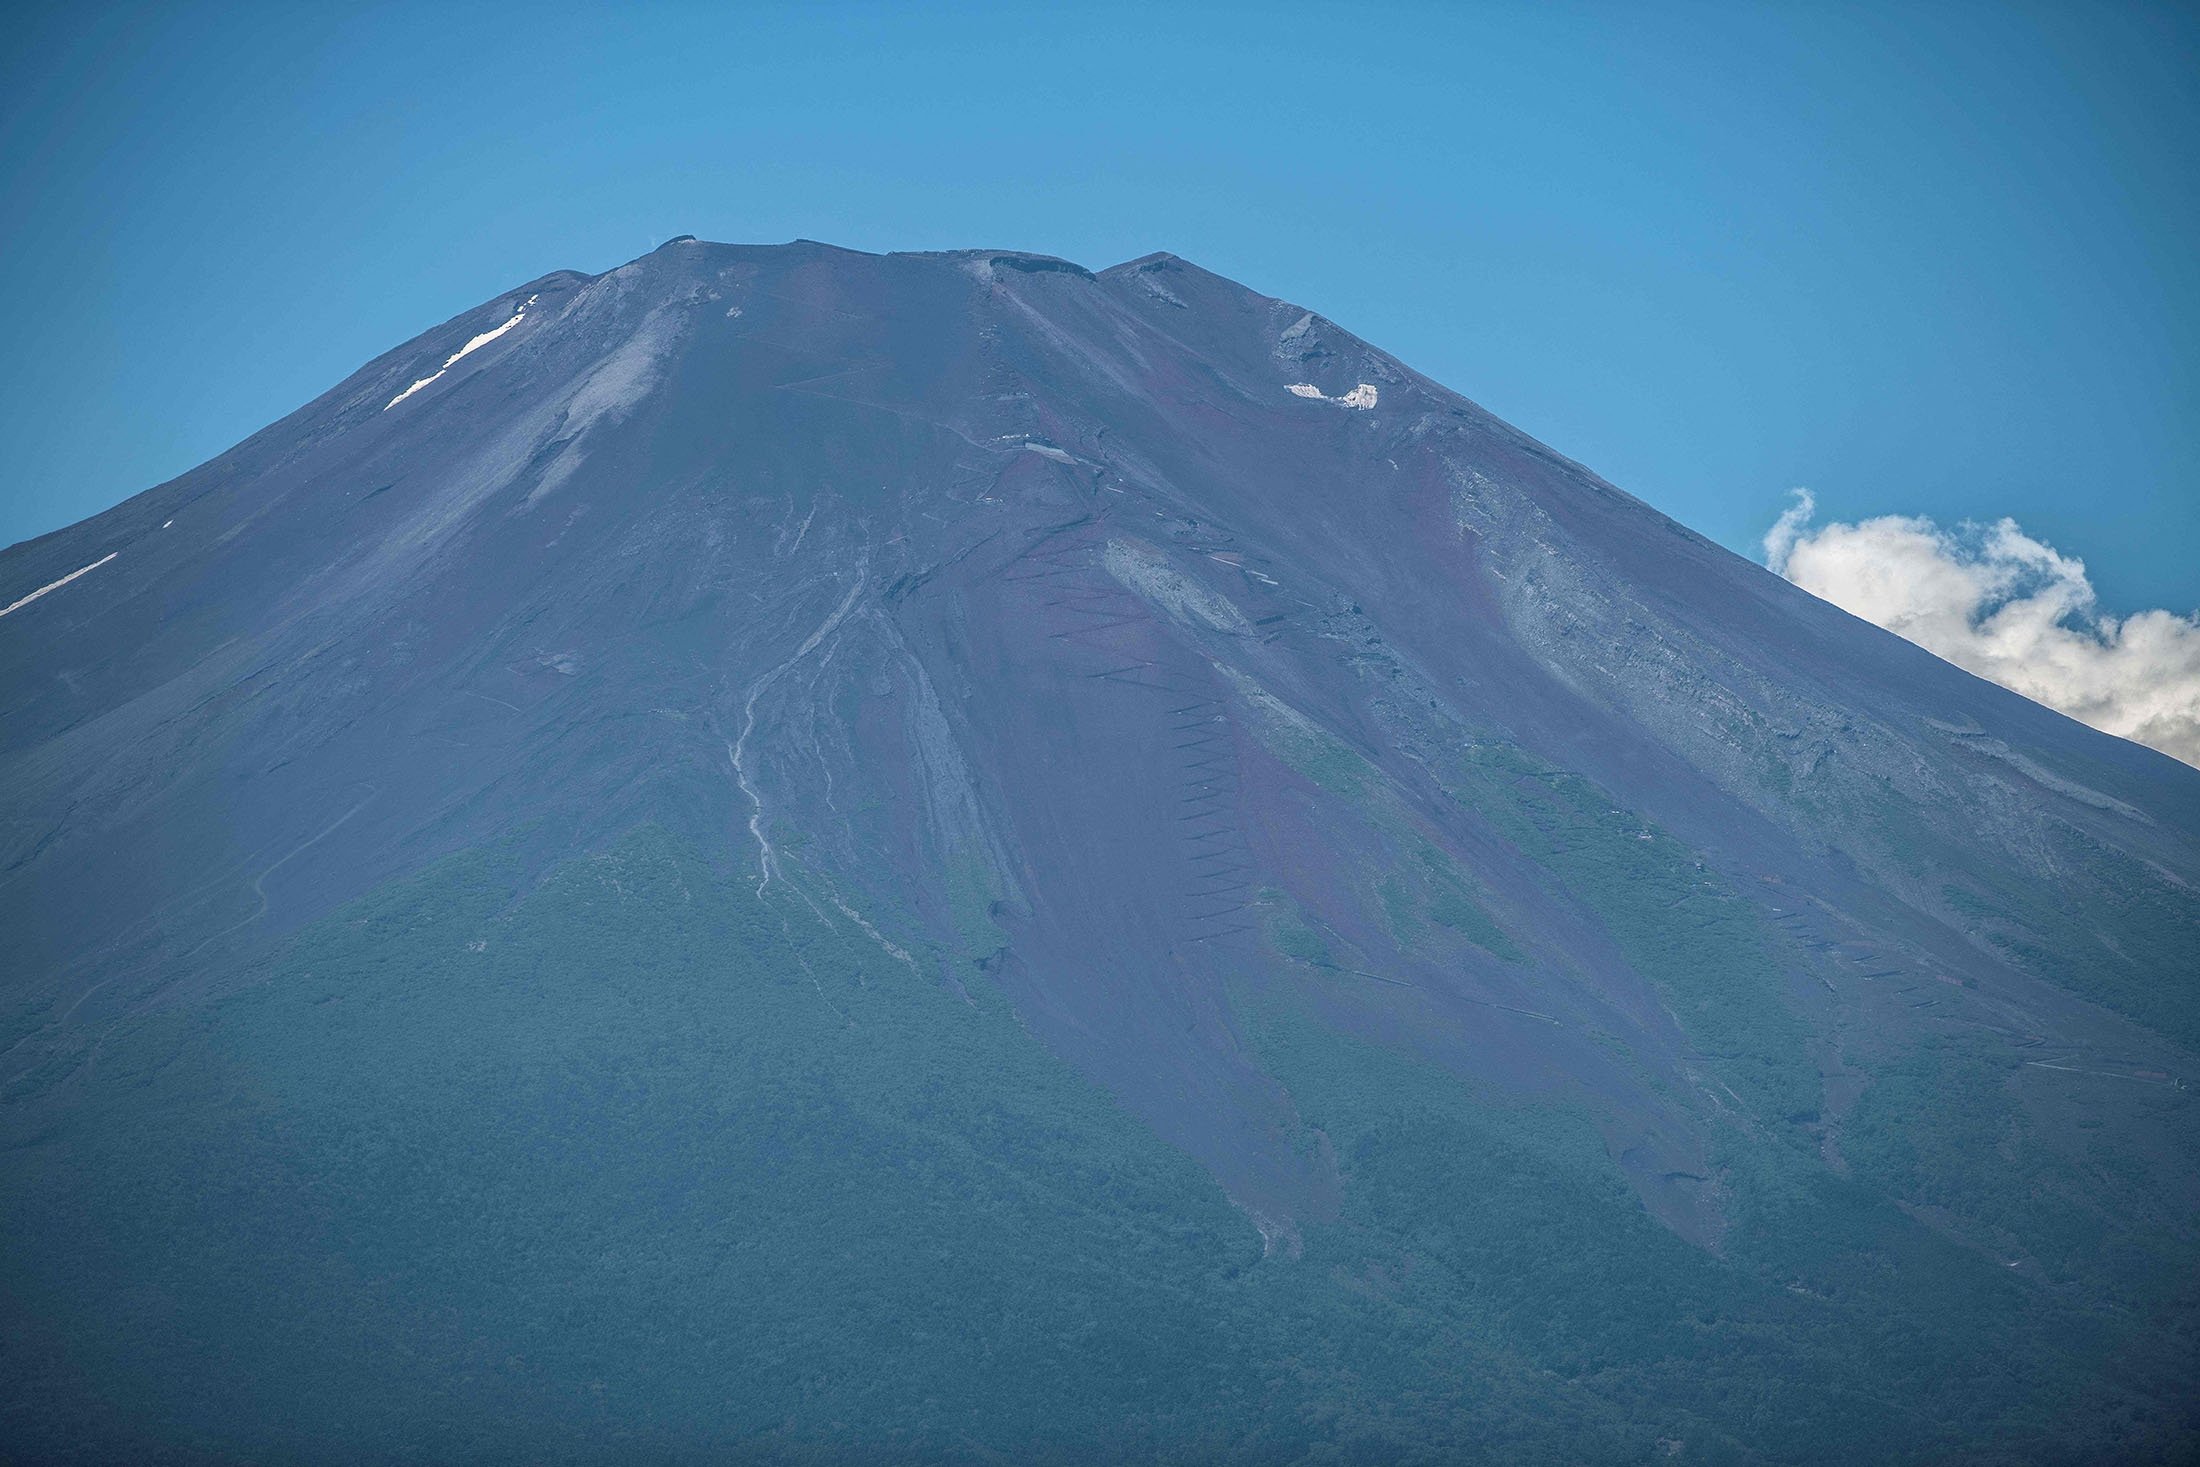 Part of the trail zigzagging on the side of Mount Fuji can be seen, some 70 kilometers (43 miles) west of the capital Tokyo, Japan, July 19, 2021. (AFP Photo)